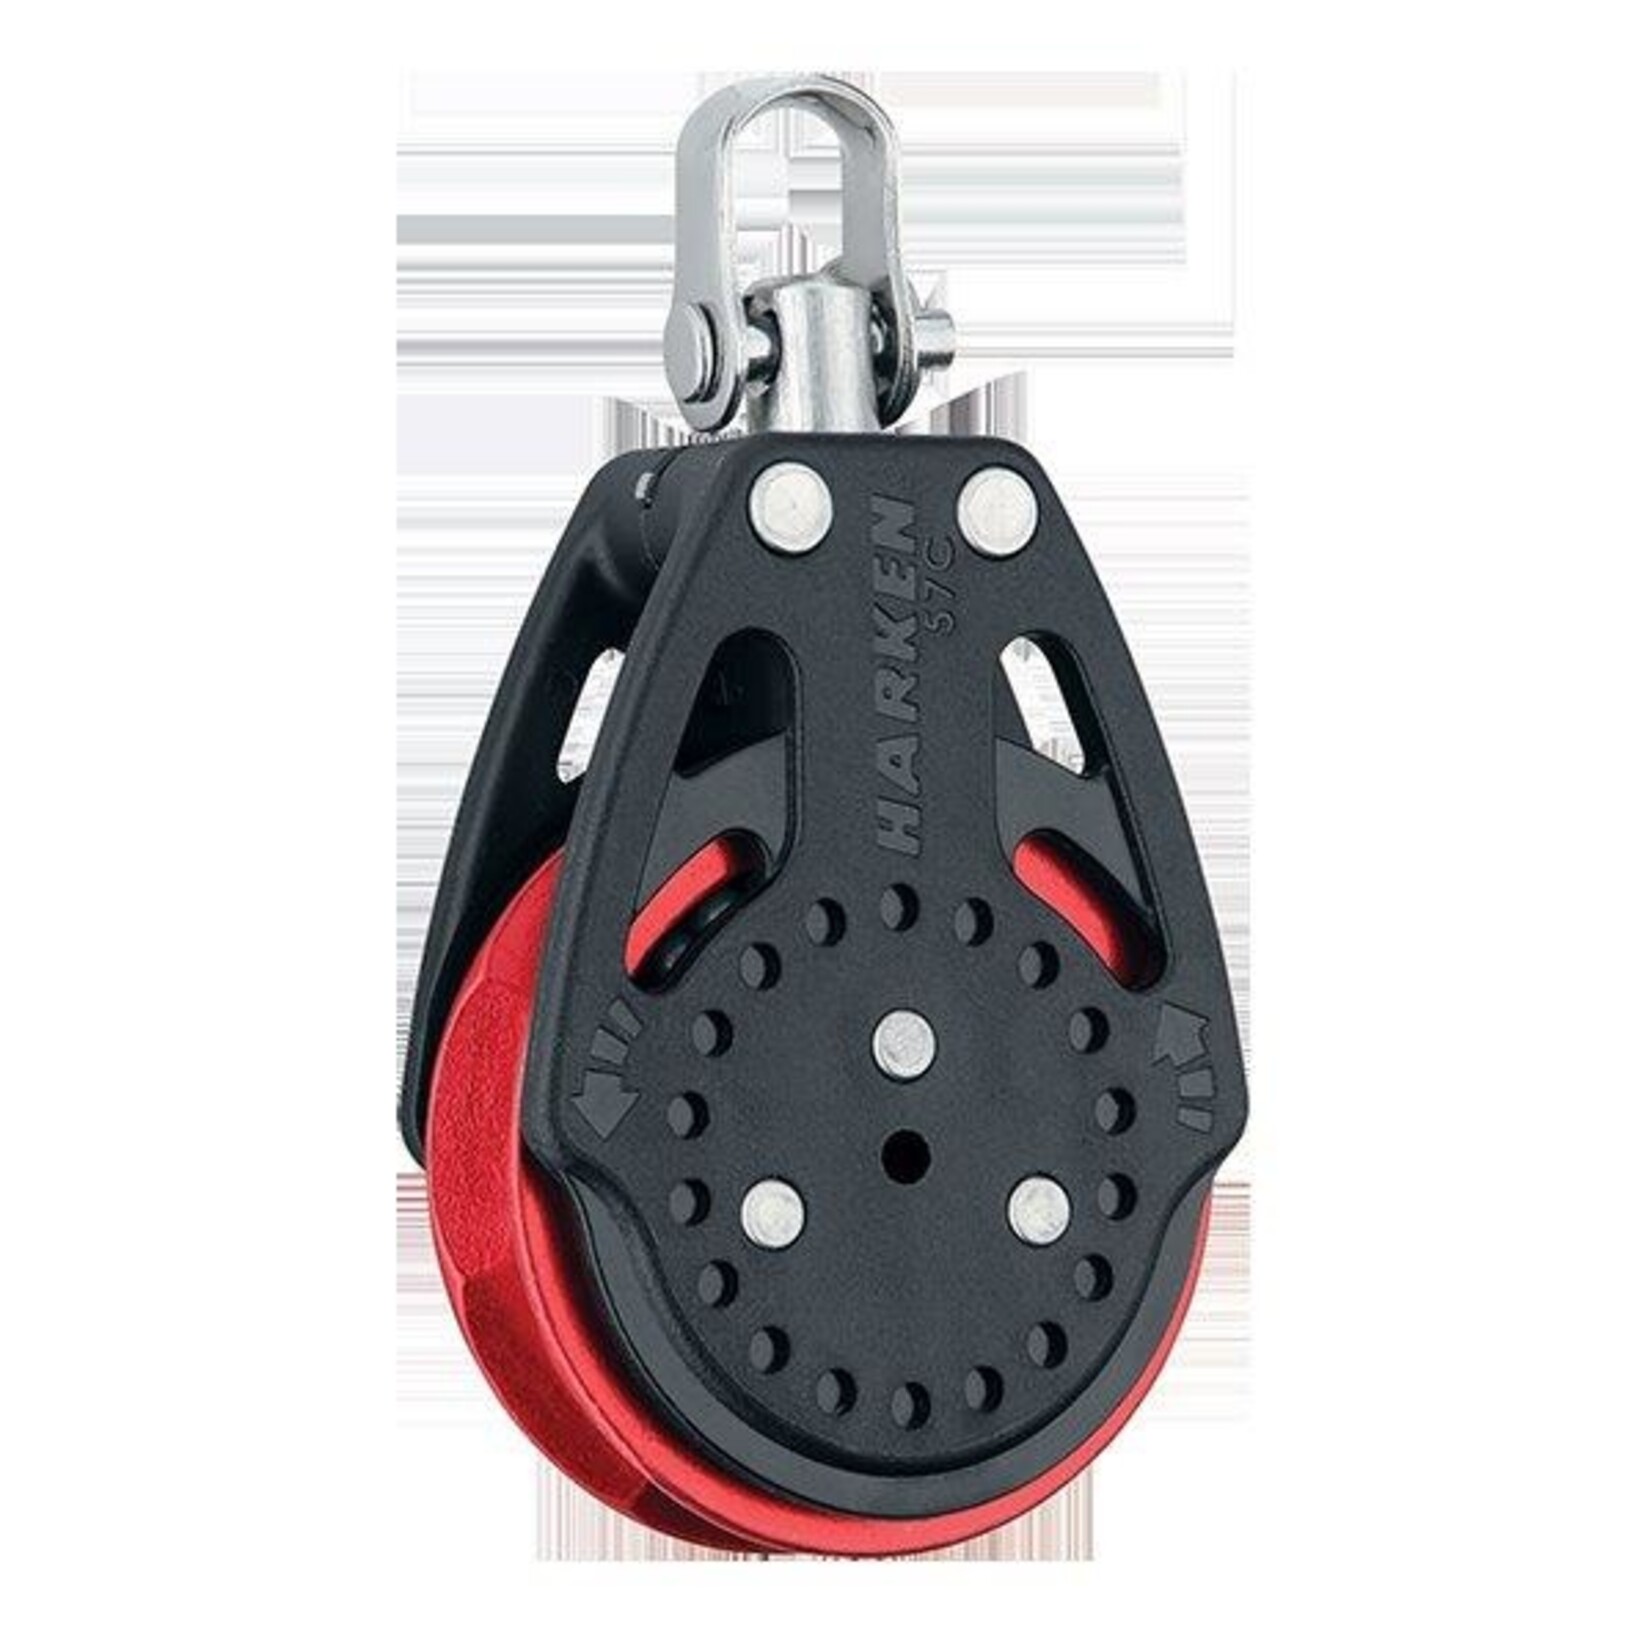 Harken 57mm Carbo Ratchamatic